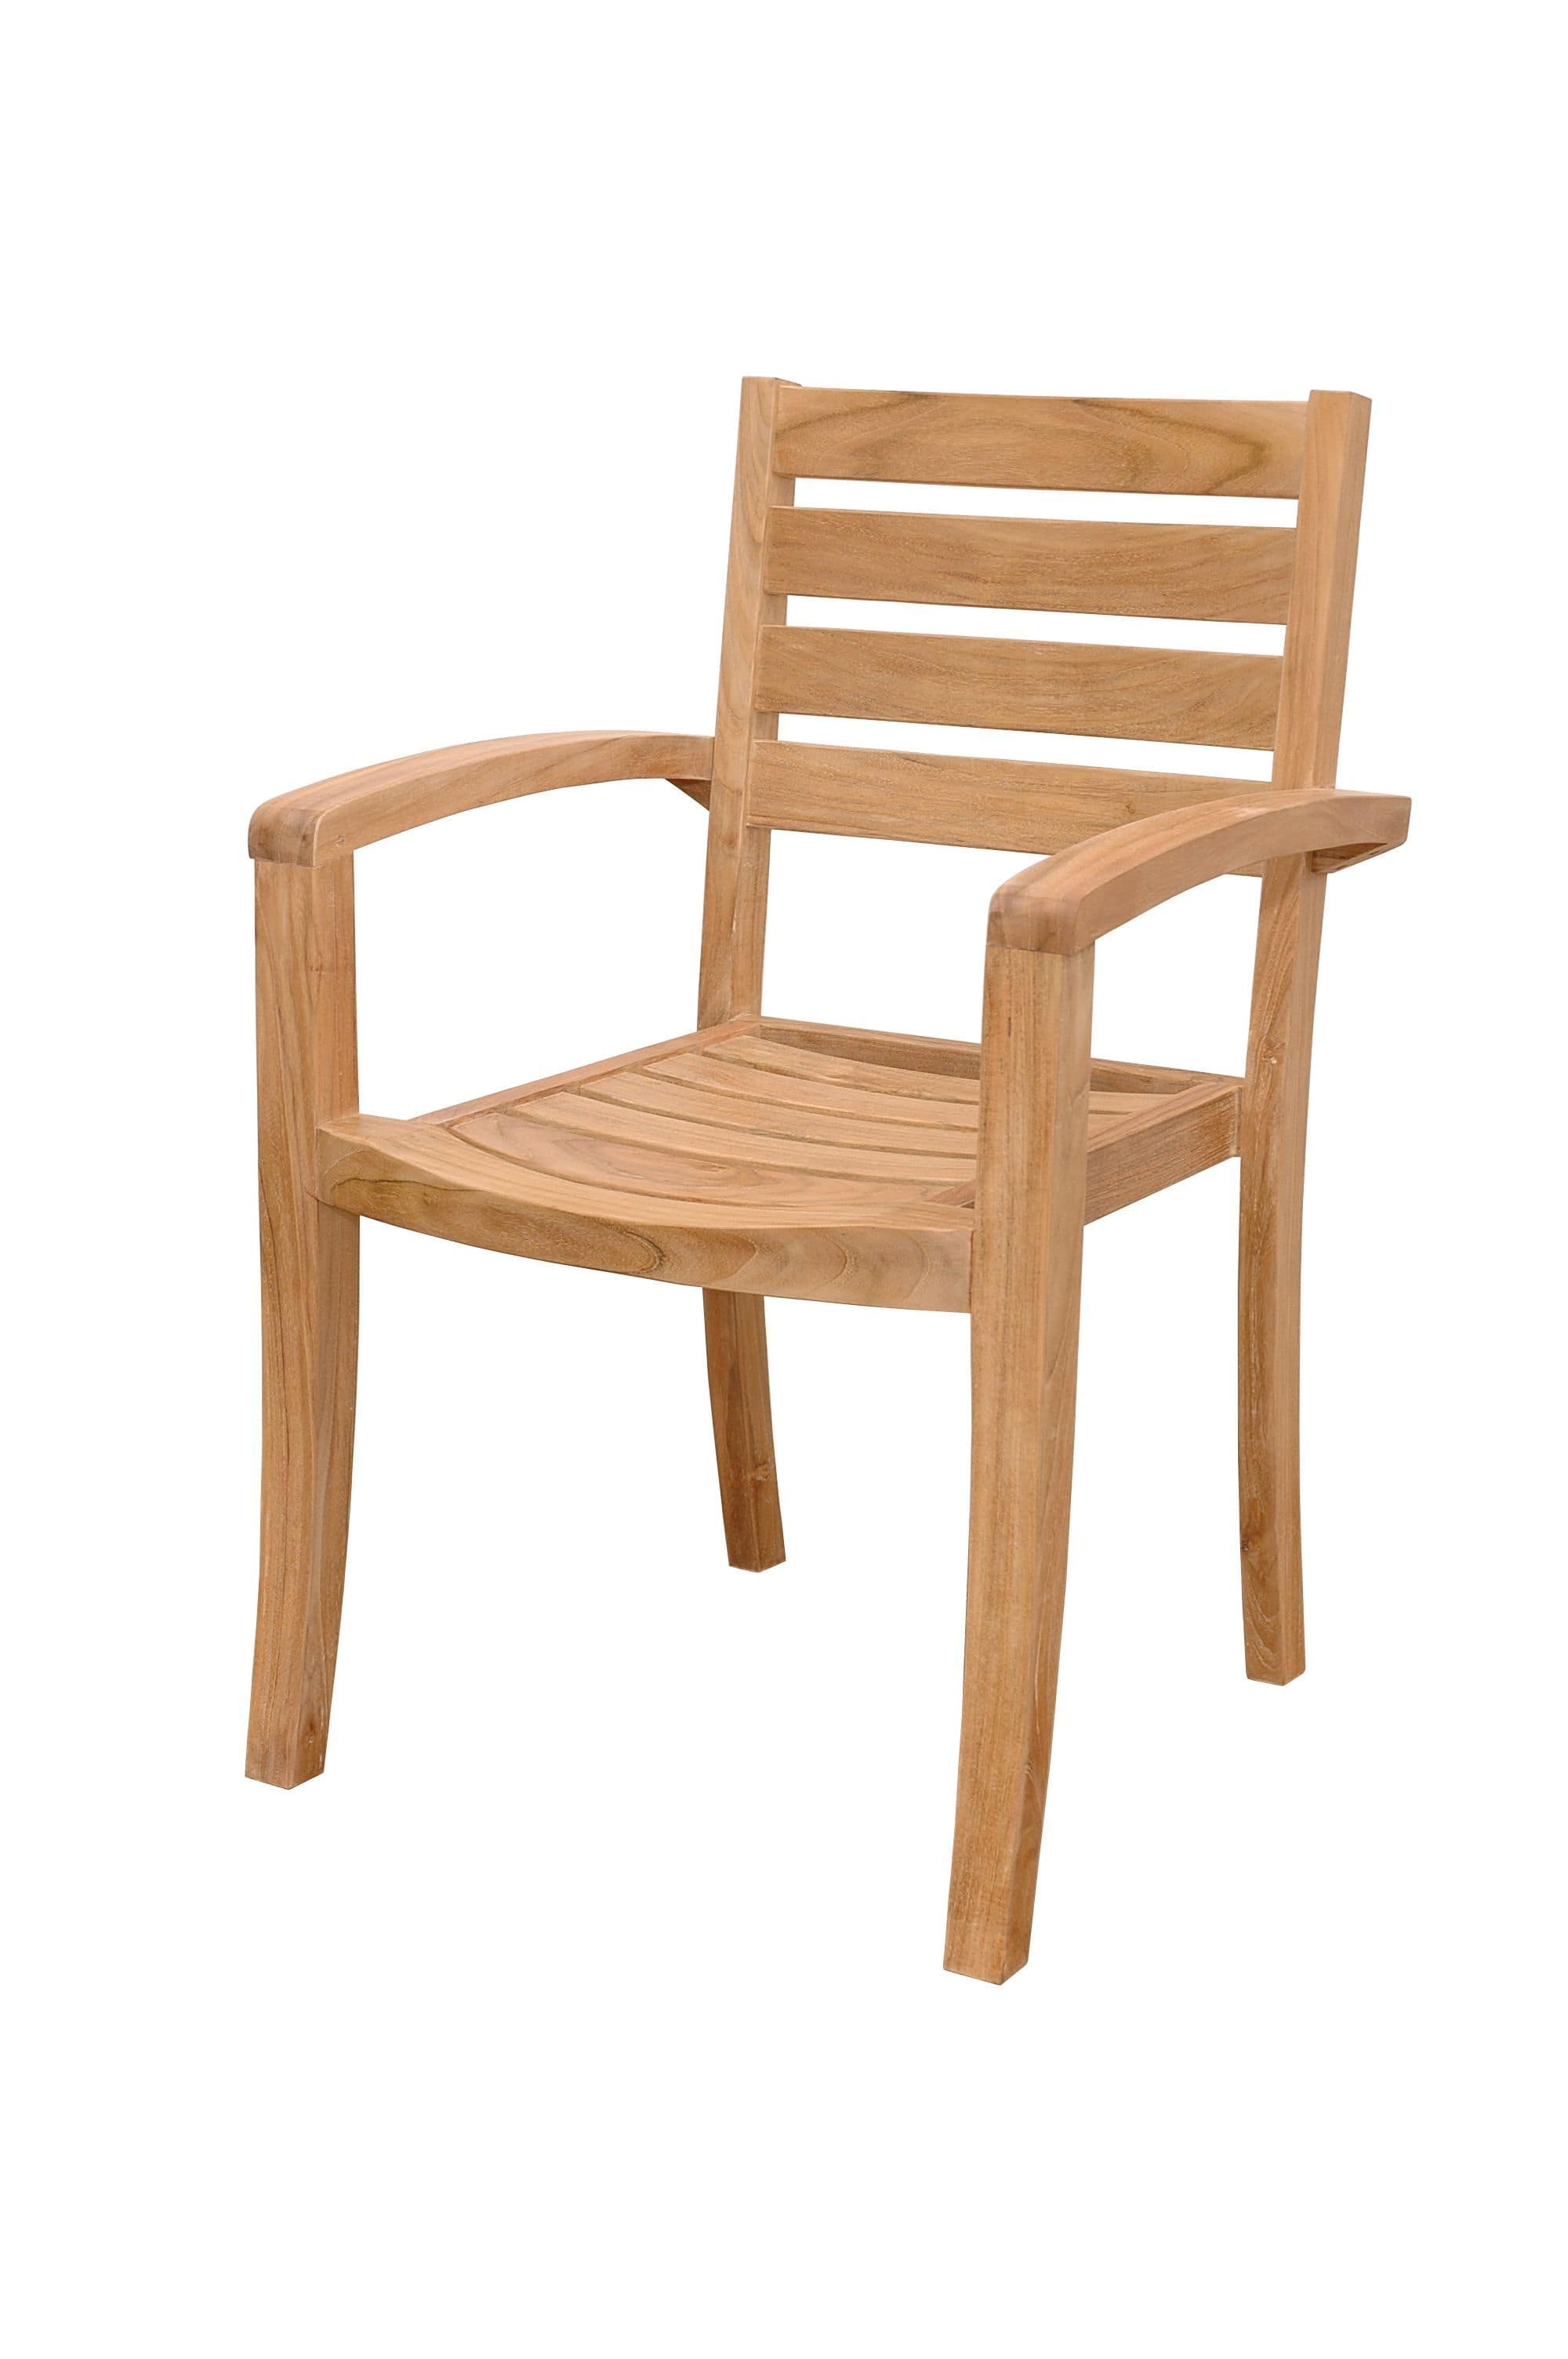 Anderson Teak Outdoor Folding Chairs Anderson Teak Catalina Stackable Armchair (Fully Built & 4 pcs in a box)